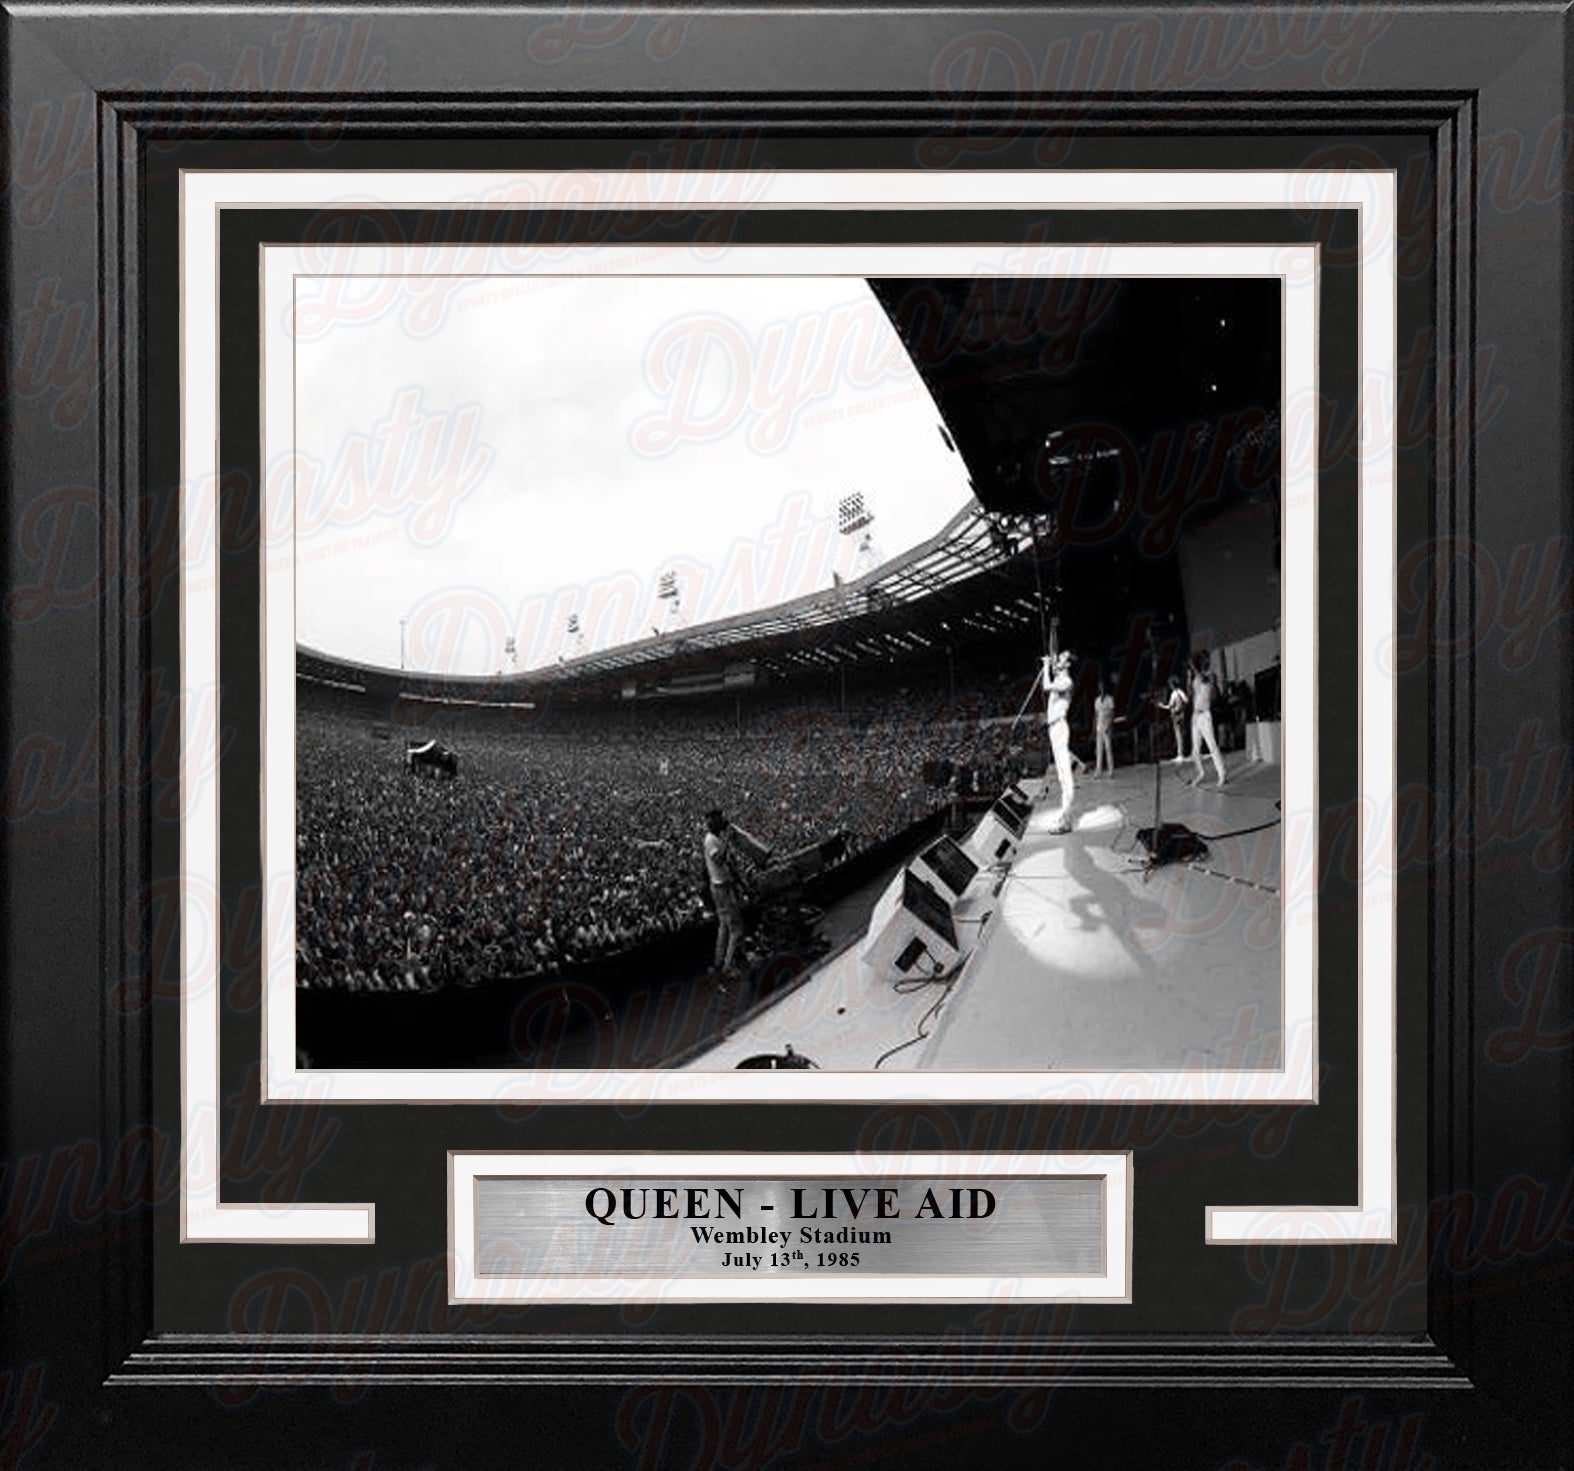 Queen Live Aid 1985 8" x 10" Framed Concert Photo - Dynasty Sports & Framing 